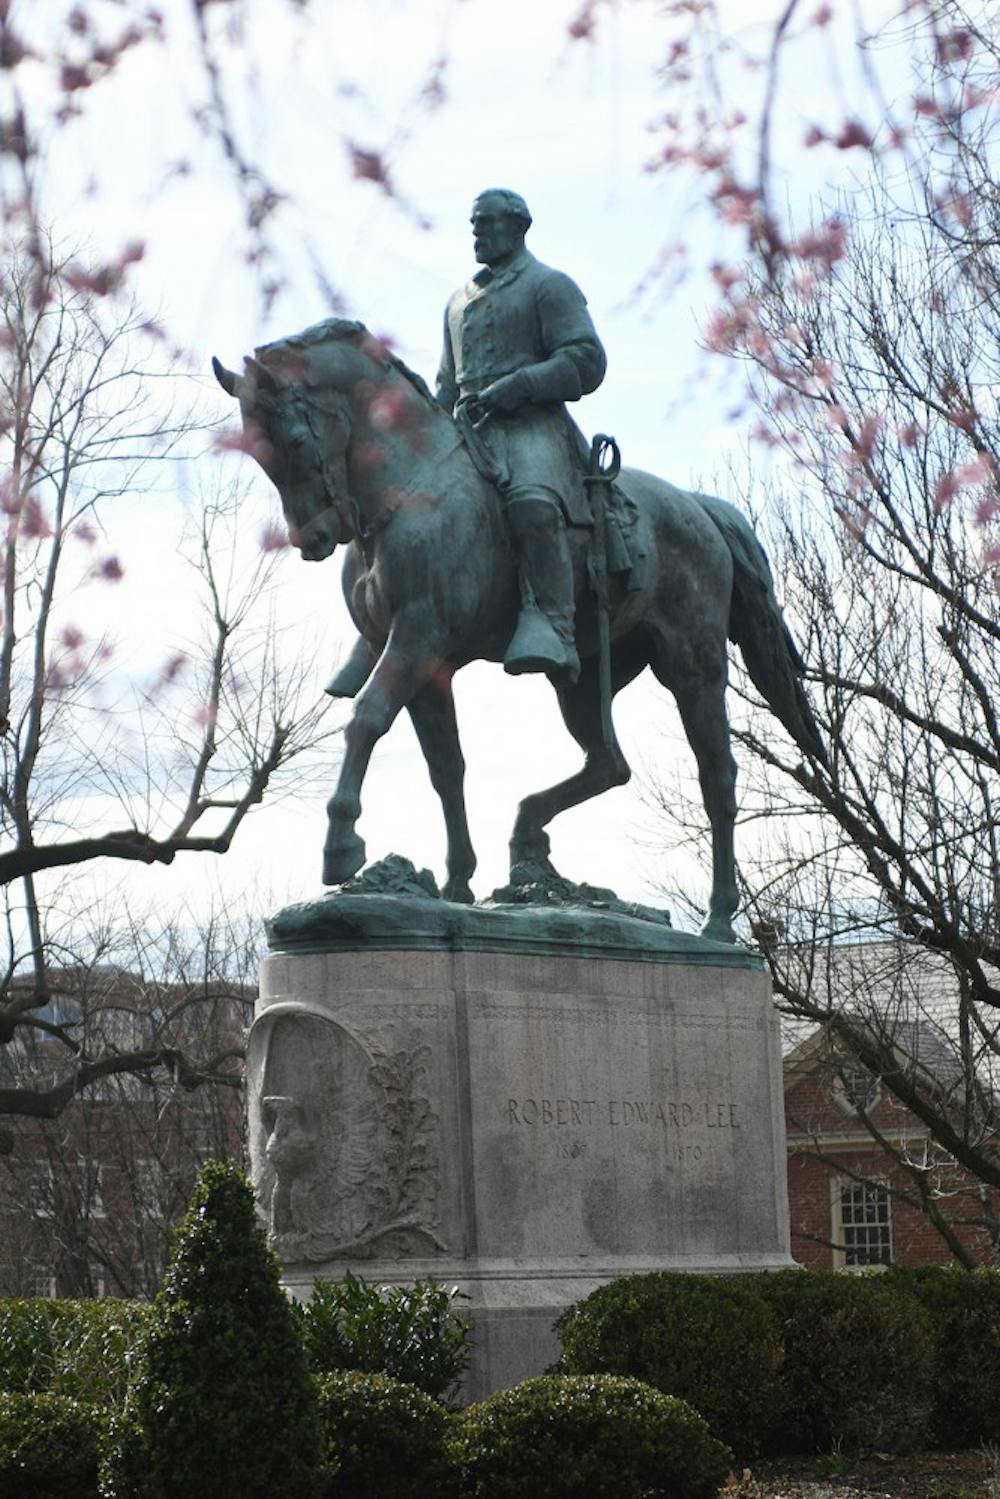 <p>The Charlottesville City Council <a href="http://wtop.com/virginia/2017/02/council-votes-to-remove-robert-e-lee-statue-from-va-park/">voted</a> to remove the statue of Robert E. Lee located in Lee Park Feb. 6.</p>